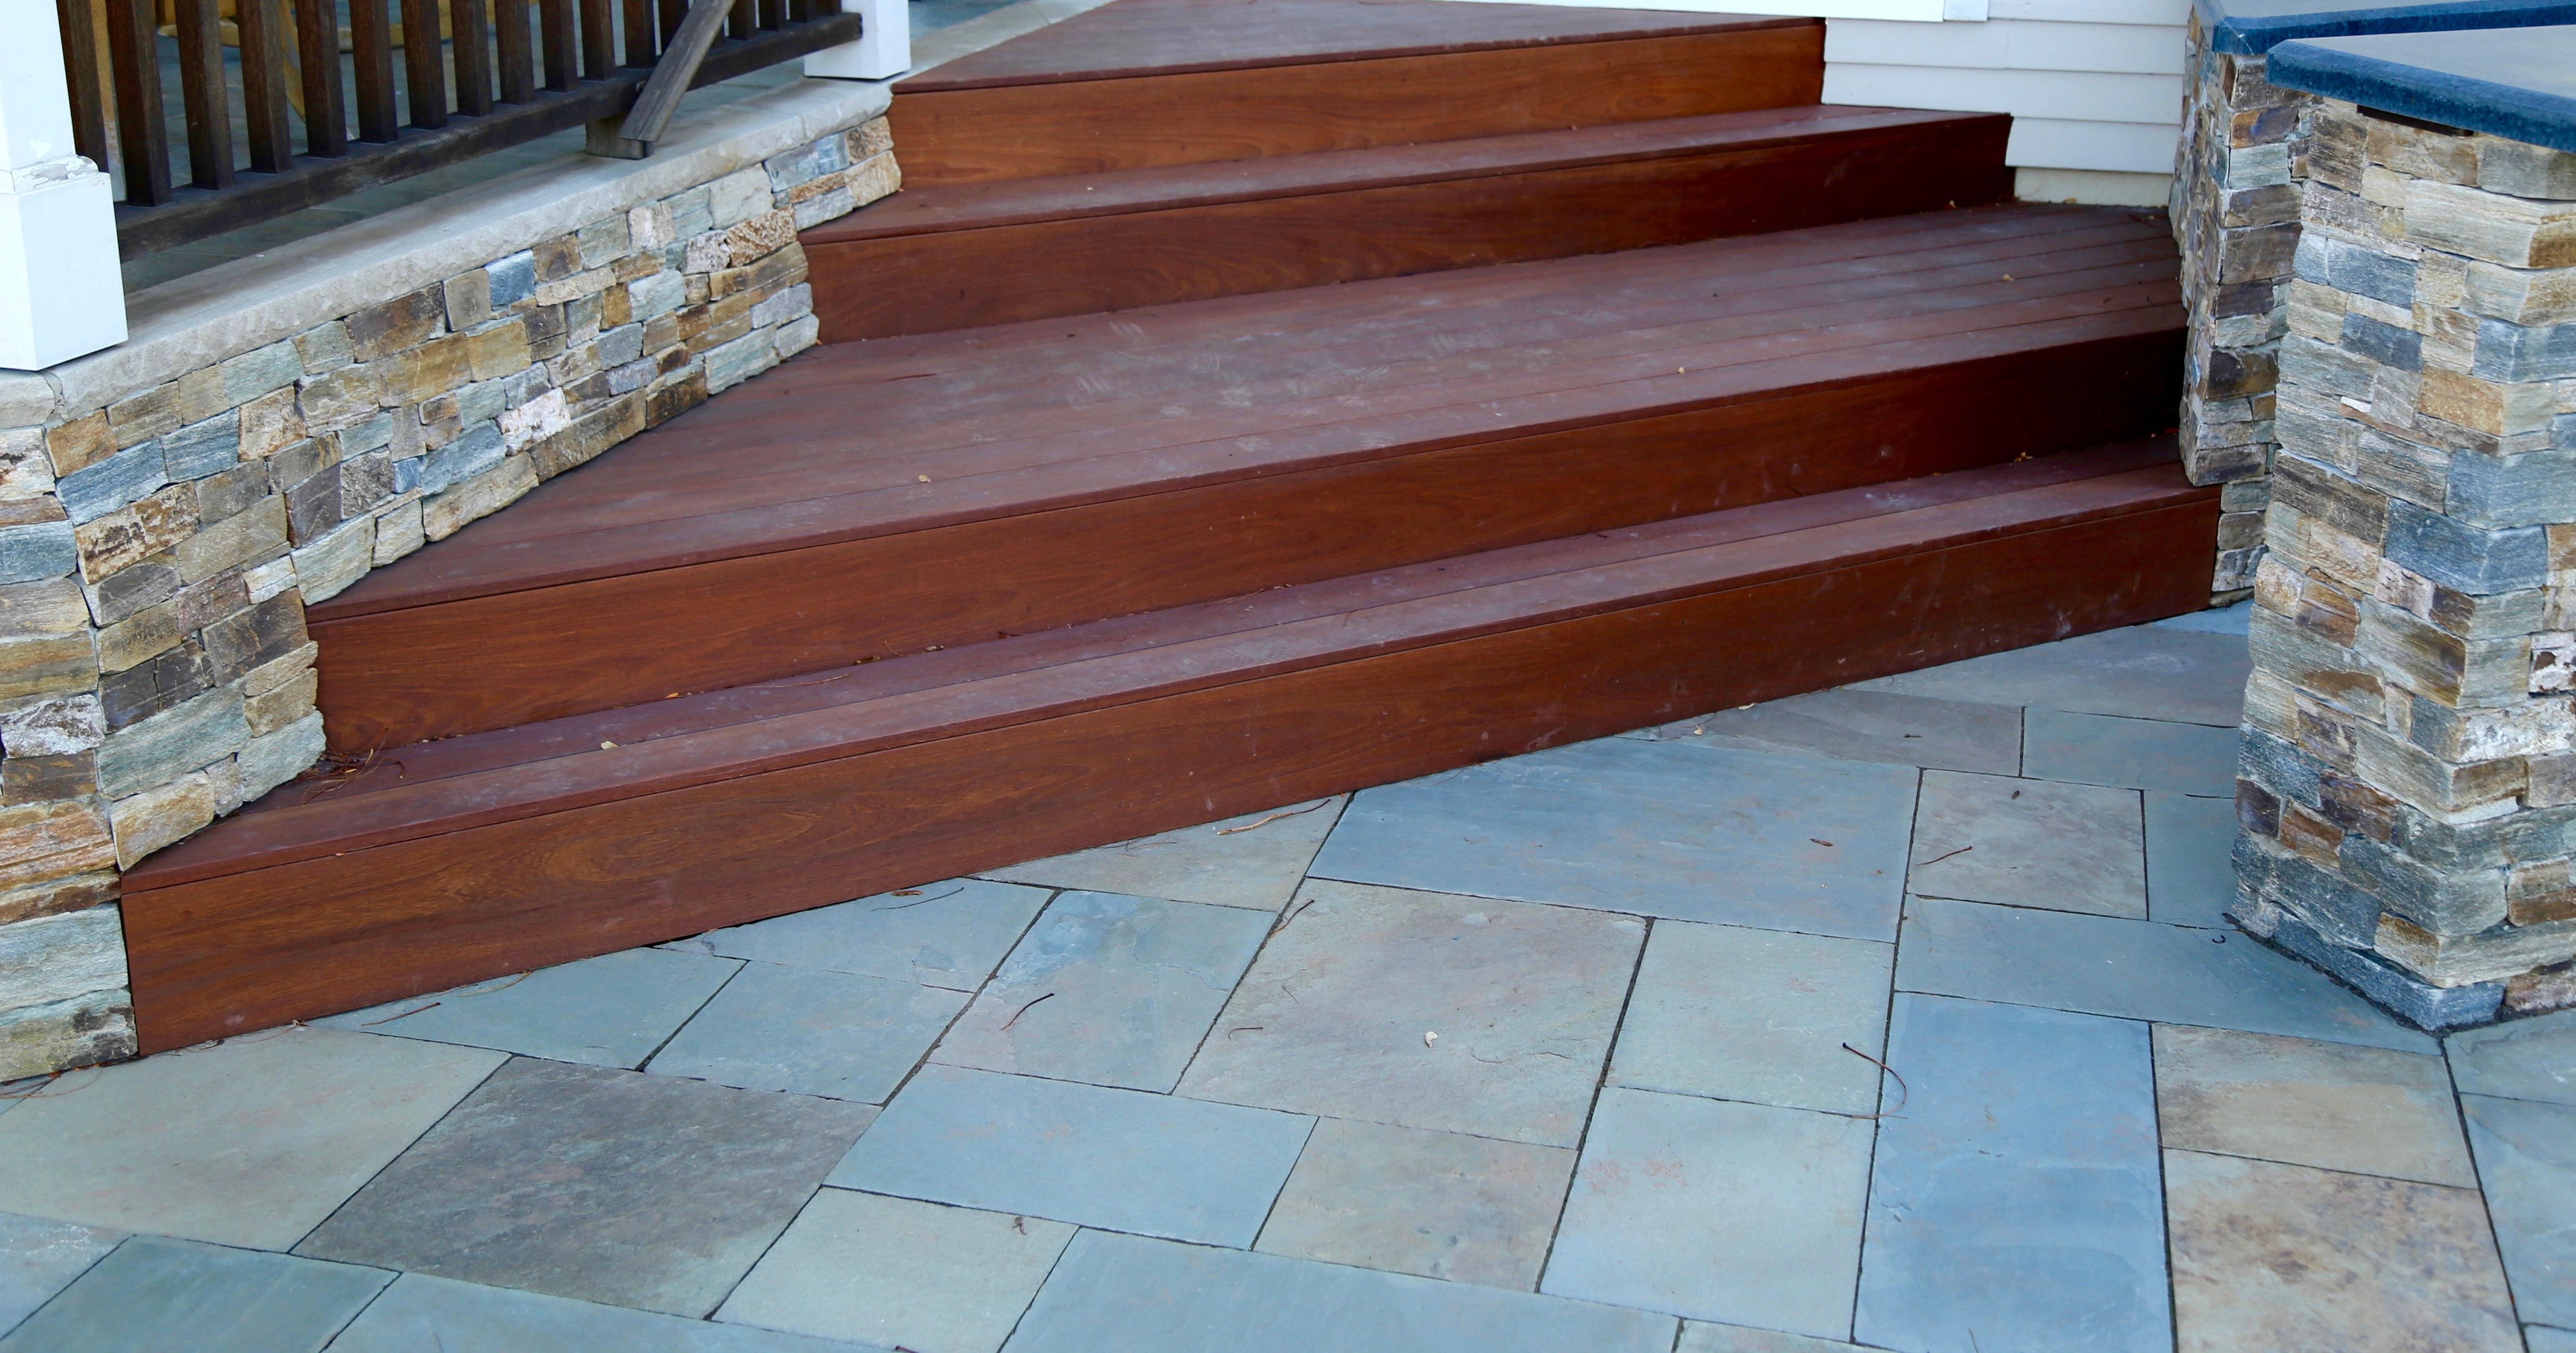 Site constraints and existing features often make the design process more challenging. They can also drive creative and unique design solutions. This challenge involved creating a new step layout that functioned seamlessly with the back door, existing raised porch and the new outdoor gourmet kitchen. We replaced the existing square steps and railing with these triangular Brazilian Walnut steps with a landing in the middle eliminating the need for a new railing which would have interrupted the flow of the space! www.gardenartisansllc.com 609-371-0099  siteconstraints  designprocess  creative  unique  designsolutions  newsteps  raisedporch  gourmet  outdoorkitchen  steps  railings  brazilianwalnut  ipe  outdoorspace  naturalstone  veneer  bluestone  soapstone  landscapedesign  landscapearchitecture